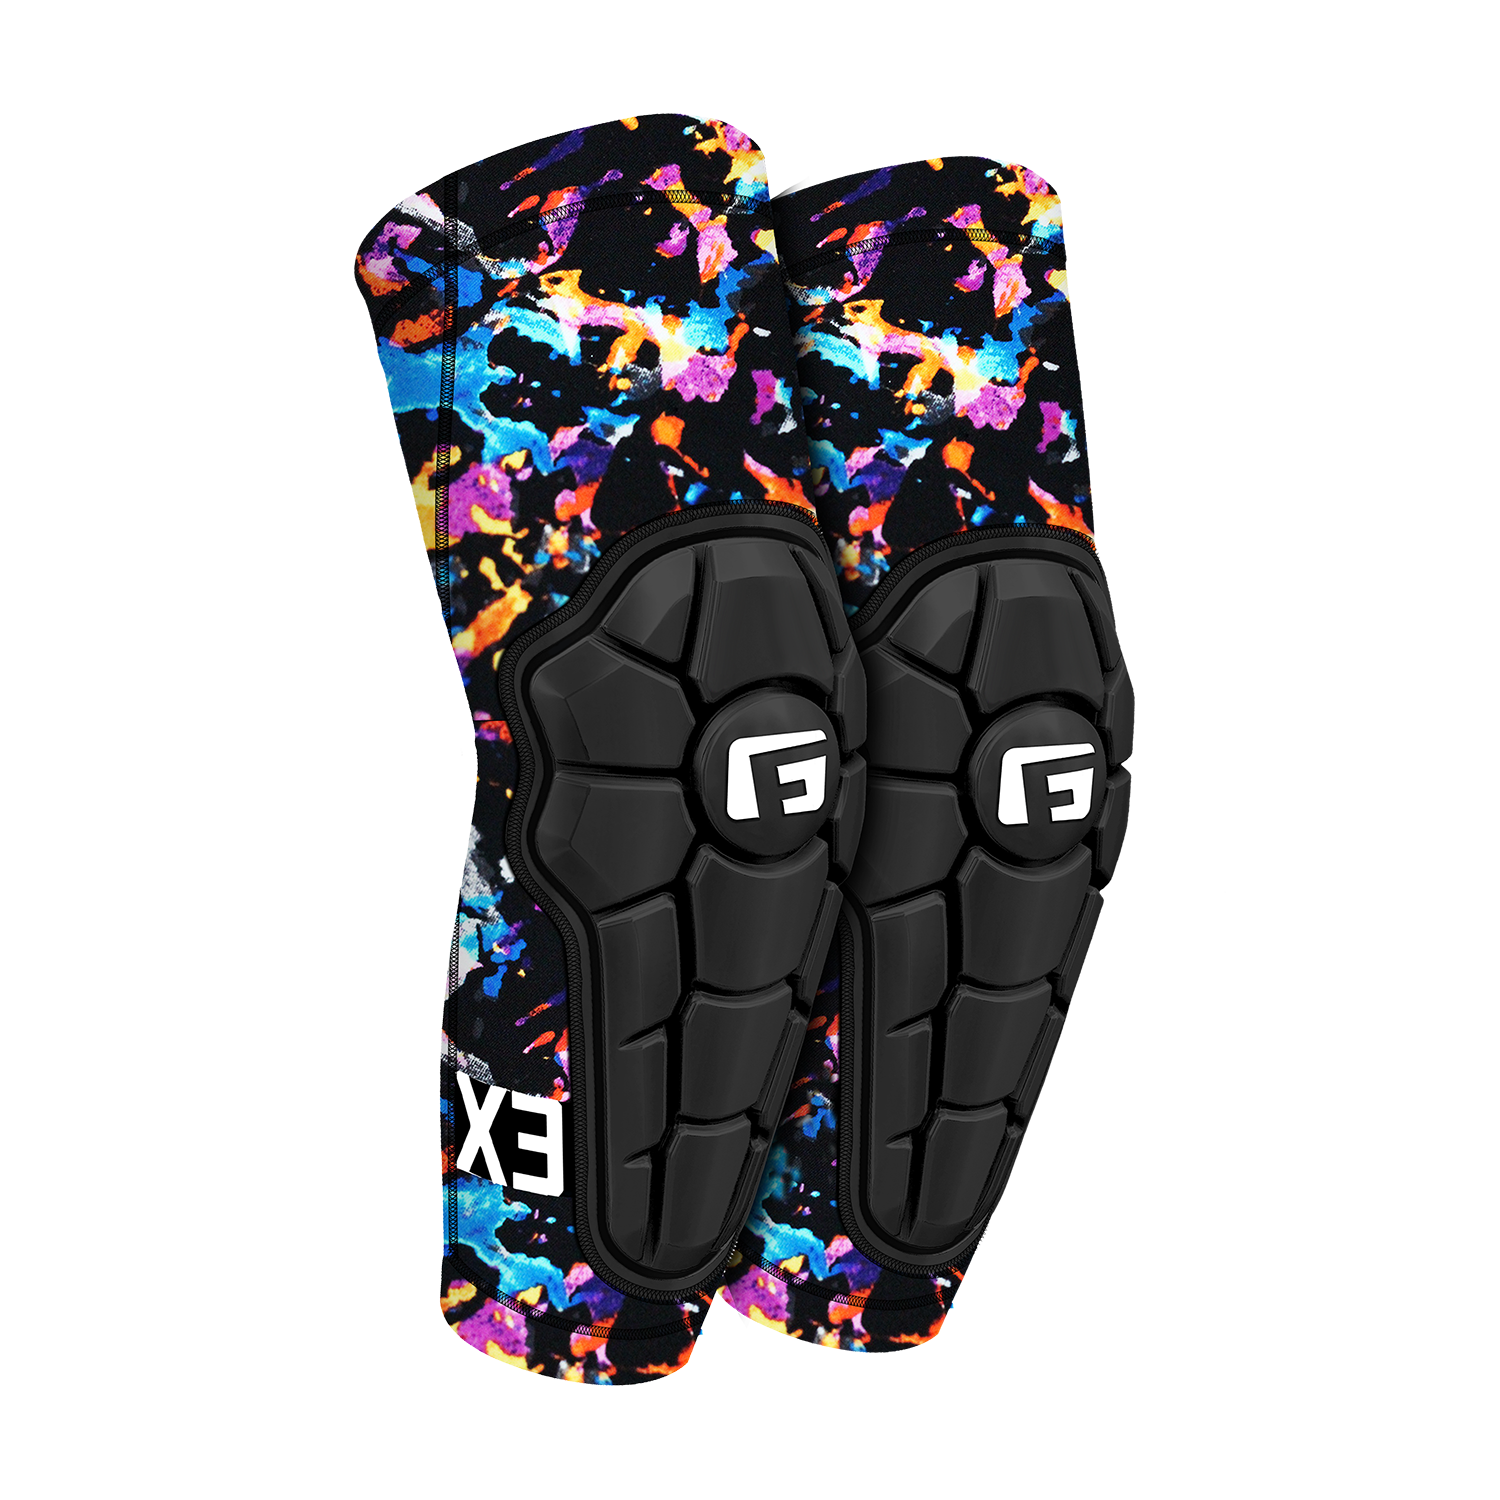 Pro-X3 Youth Elbow Guards Elbow Pads Child Mountain BIking Ski Snowboard, Knee protection and compression sleeve